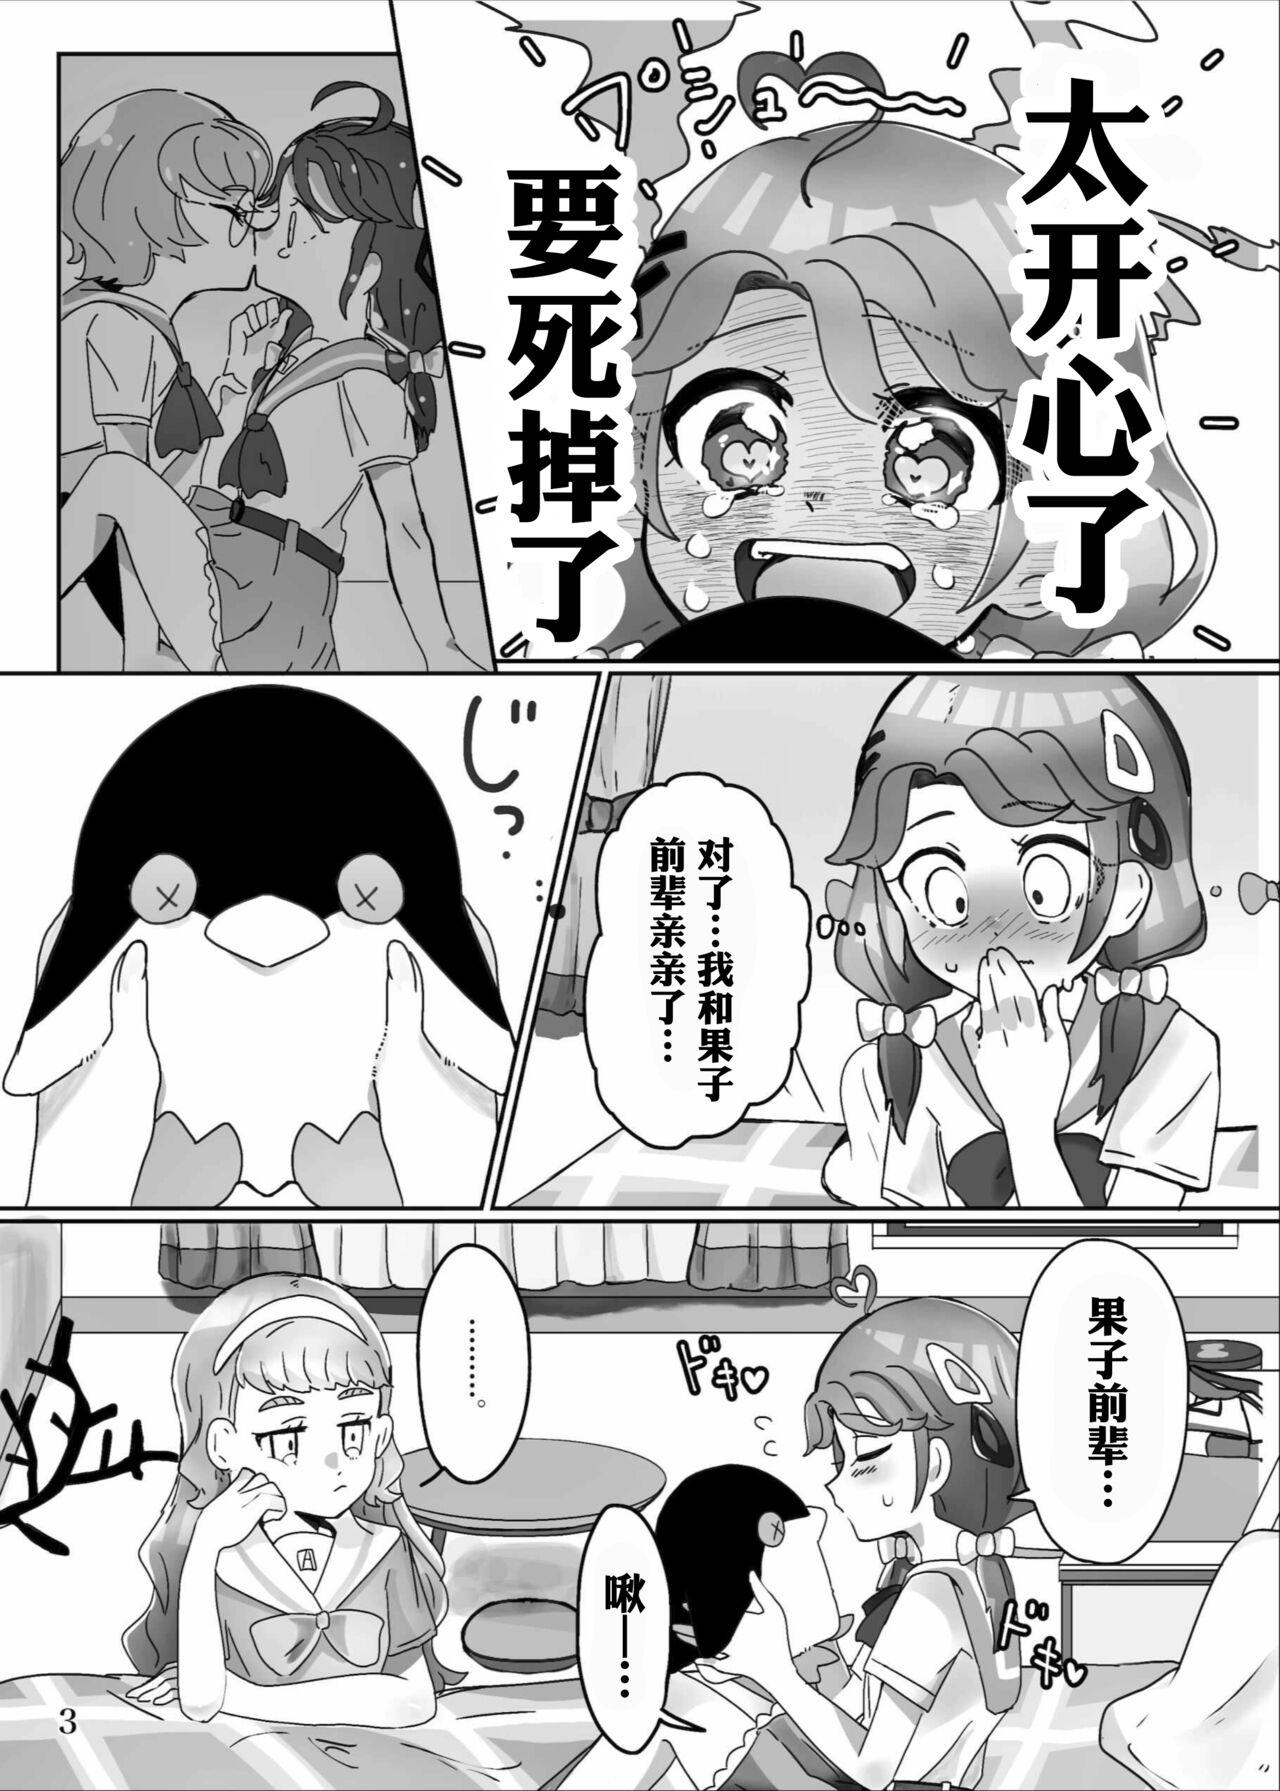 Cocksuckers yaritaigotone do my best - Pretty cure Tropical rouge precure Cock - Page 5